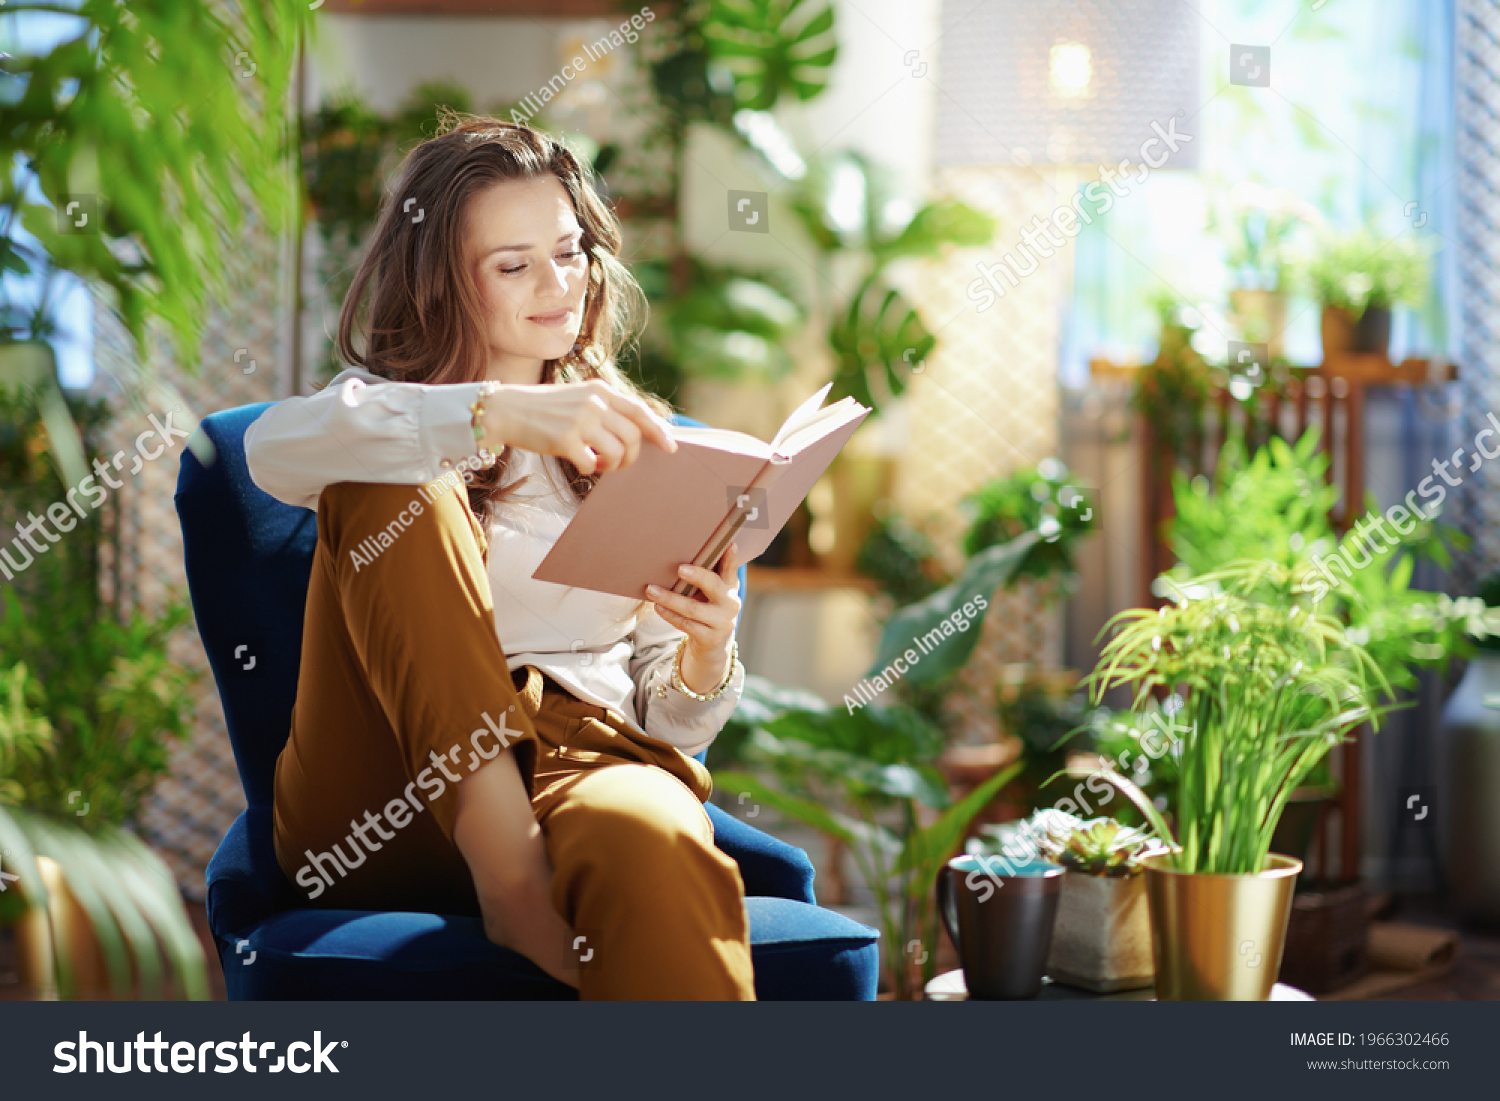 Green Home. relaxed trendy middle aged woman with long wavy hair with book in green pants and grey blouse in the modern living room in sunny day. #1966302466